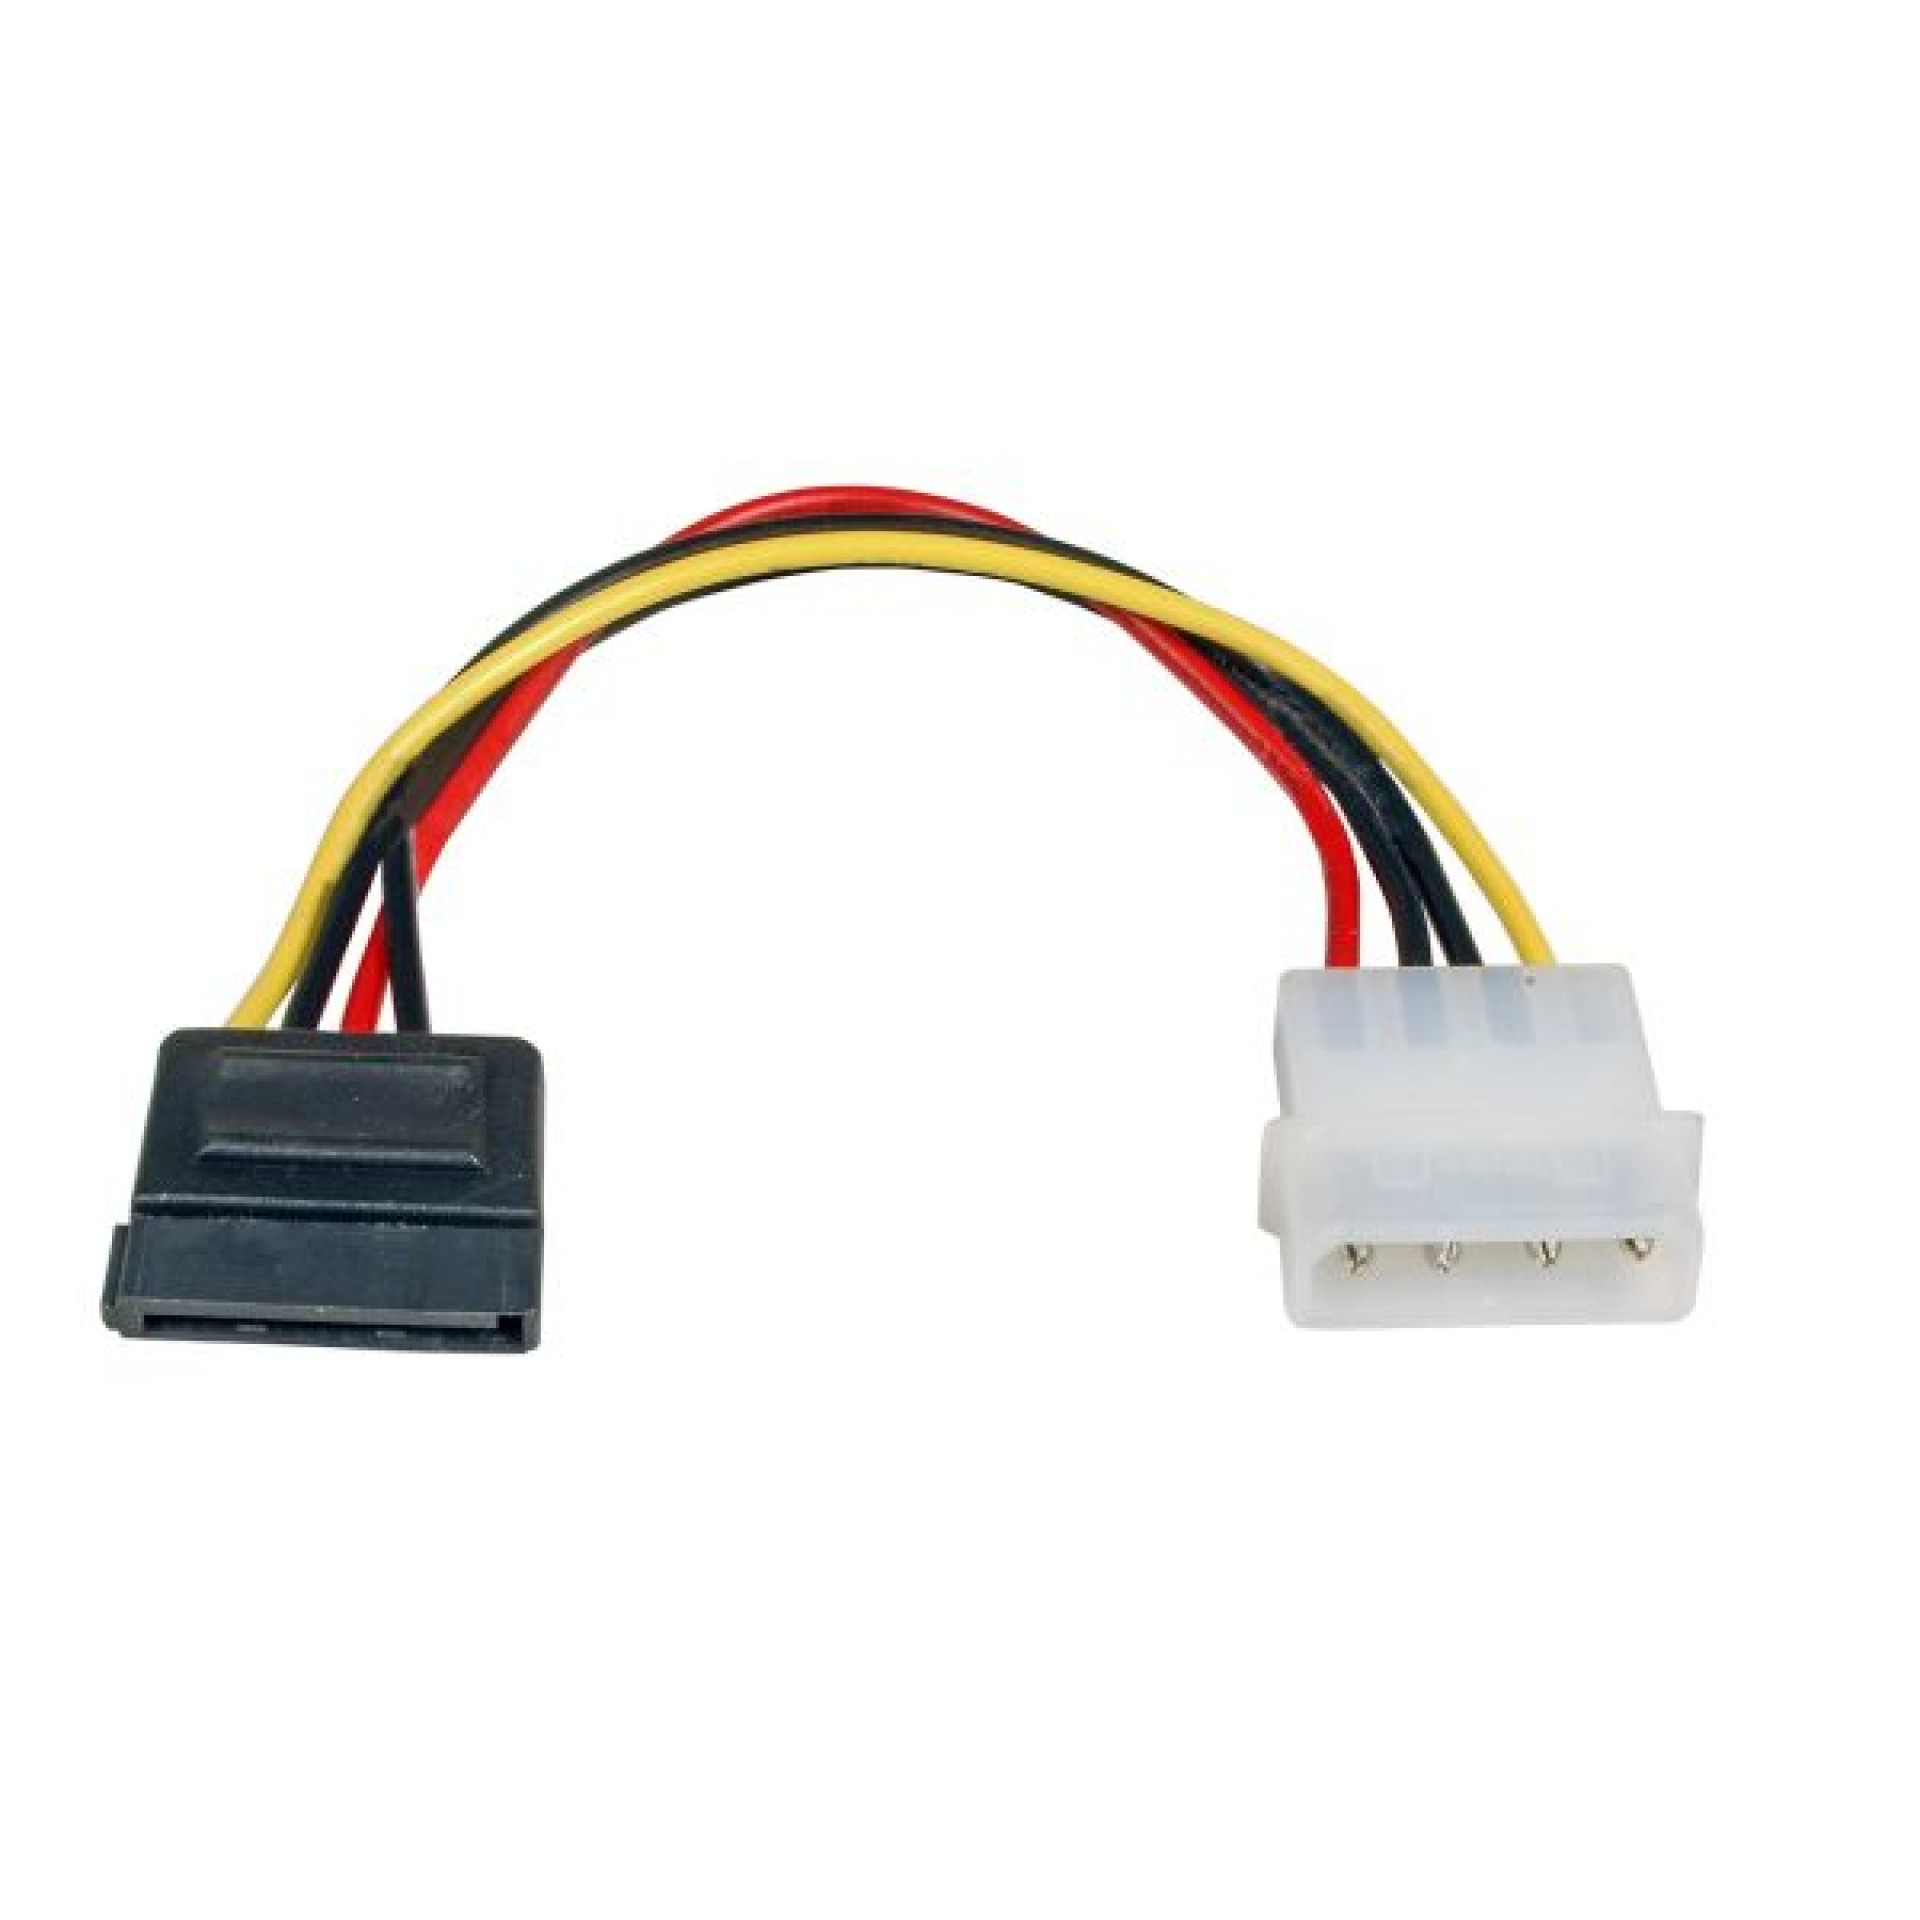 SATA Power Cable, 5,25" to SATA 15, M-M, 0,15m